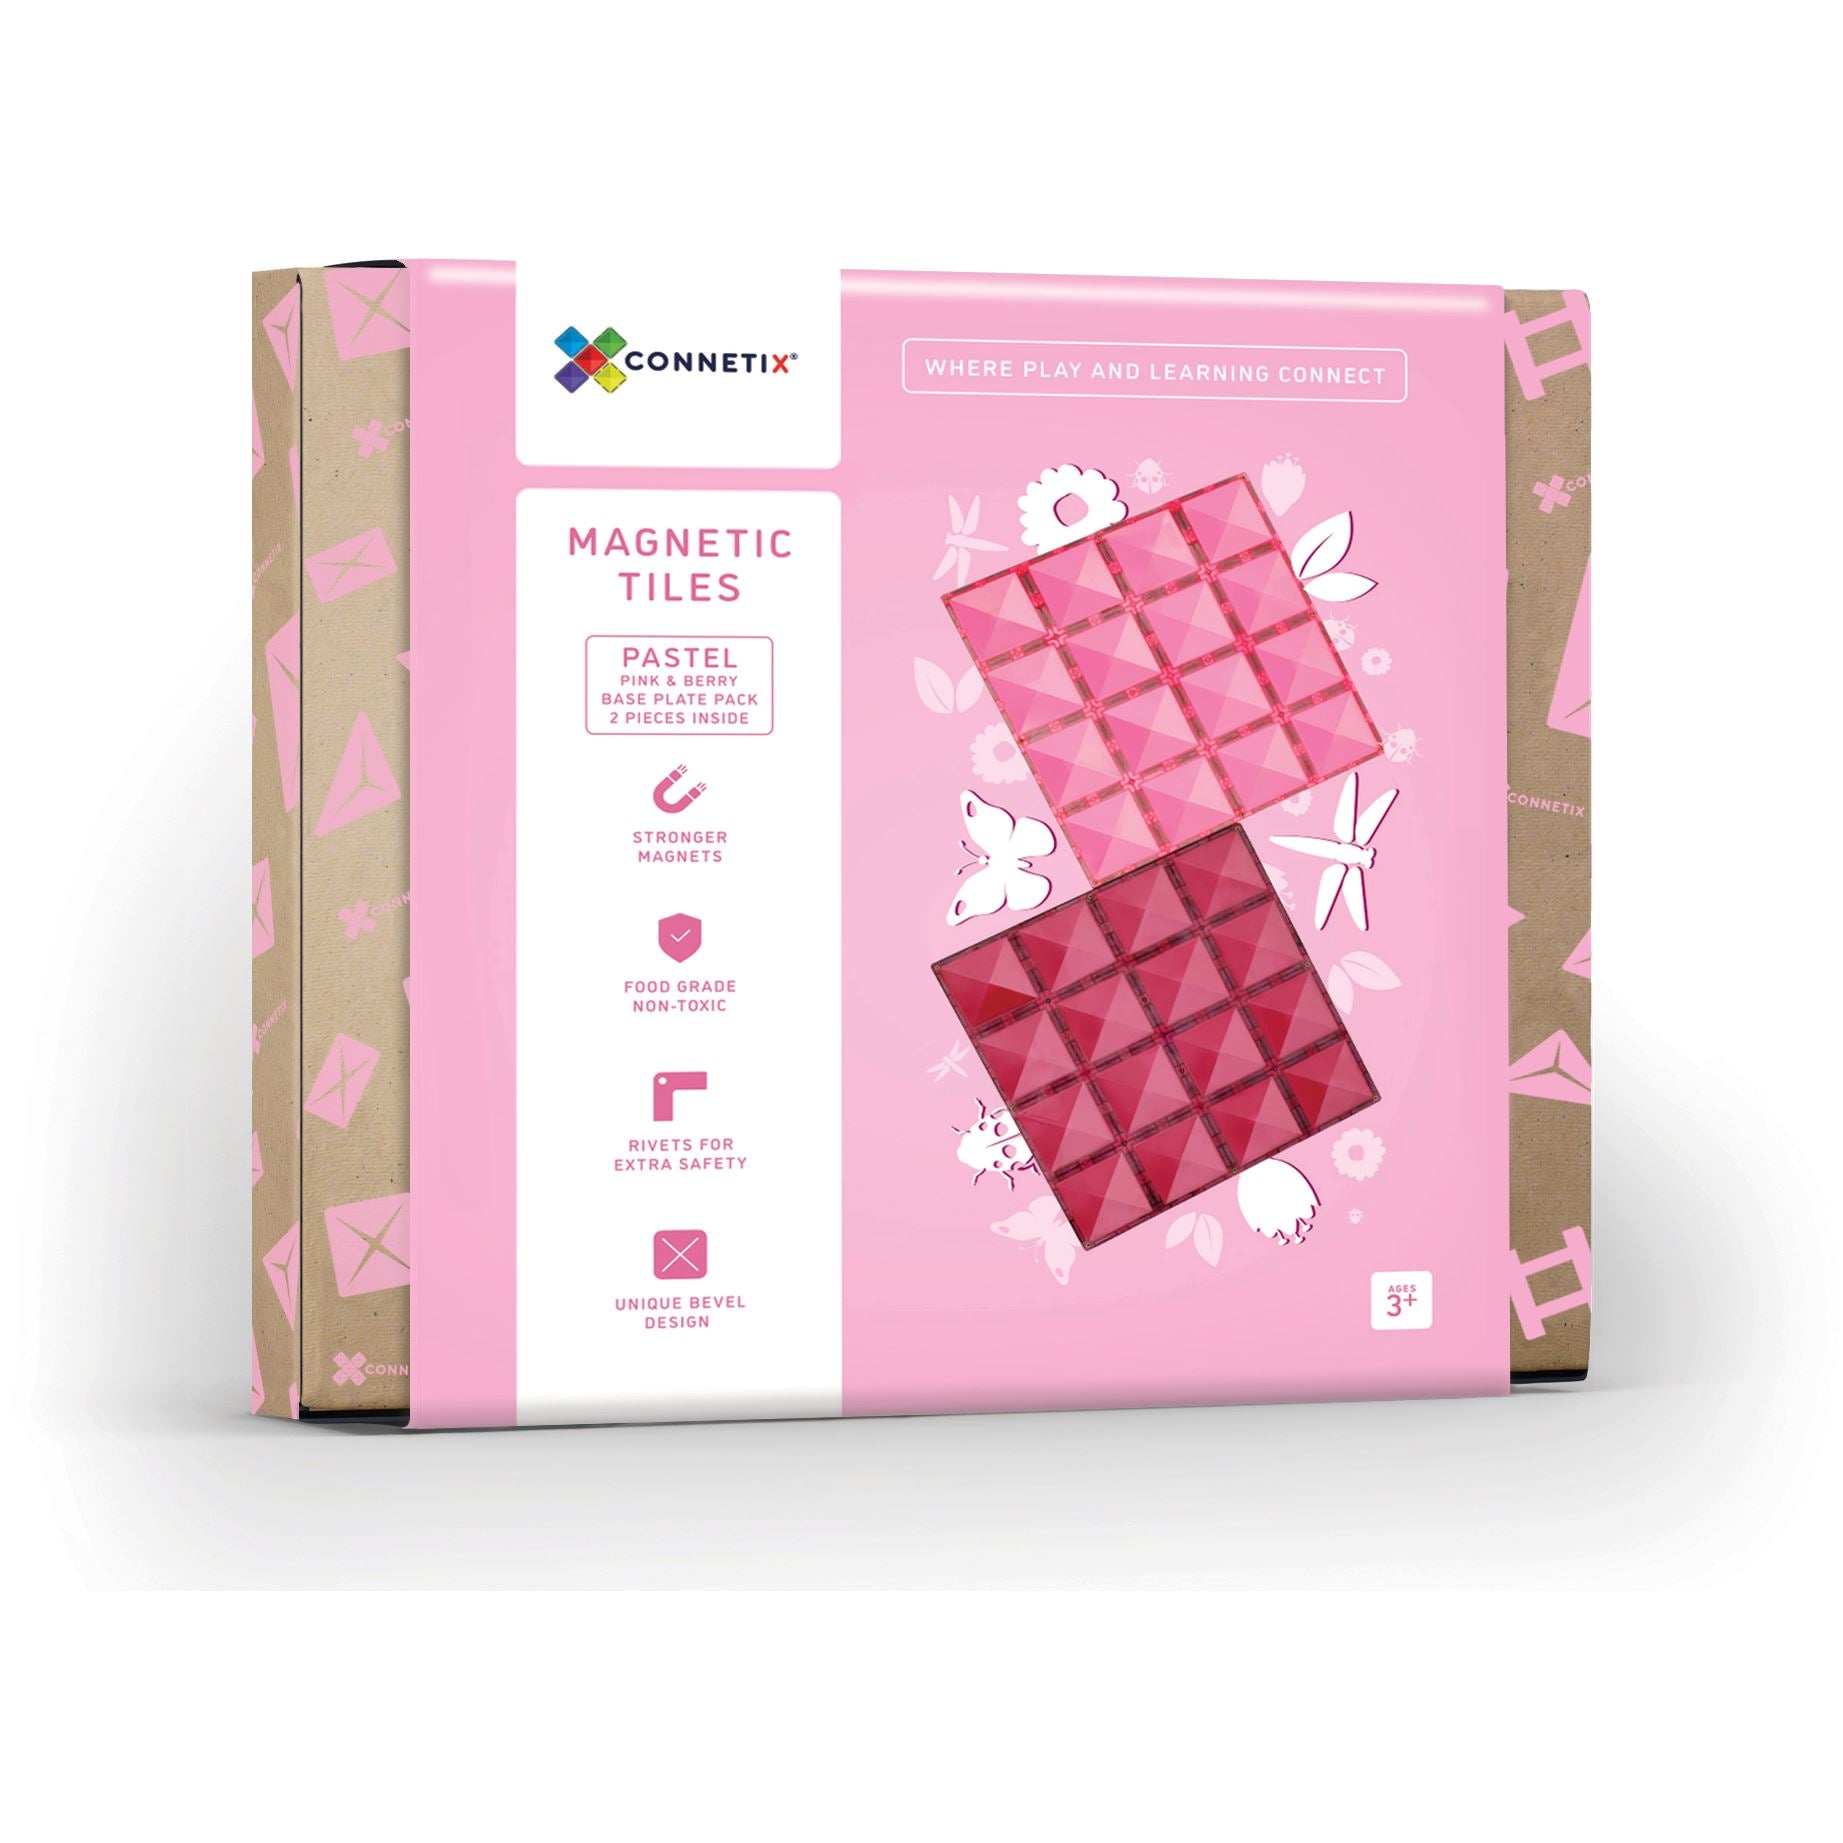 Connetix 2 Piece Base Plate Pack -- Pink & Berry